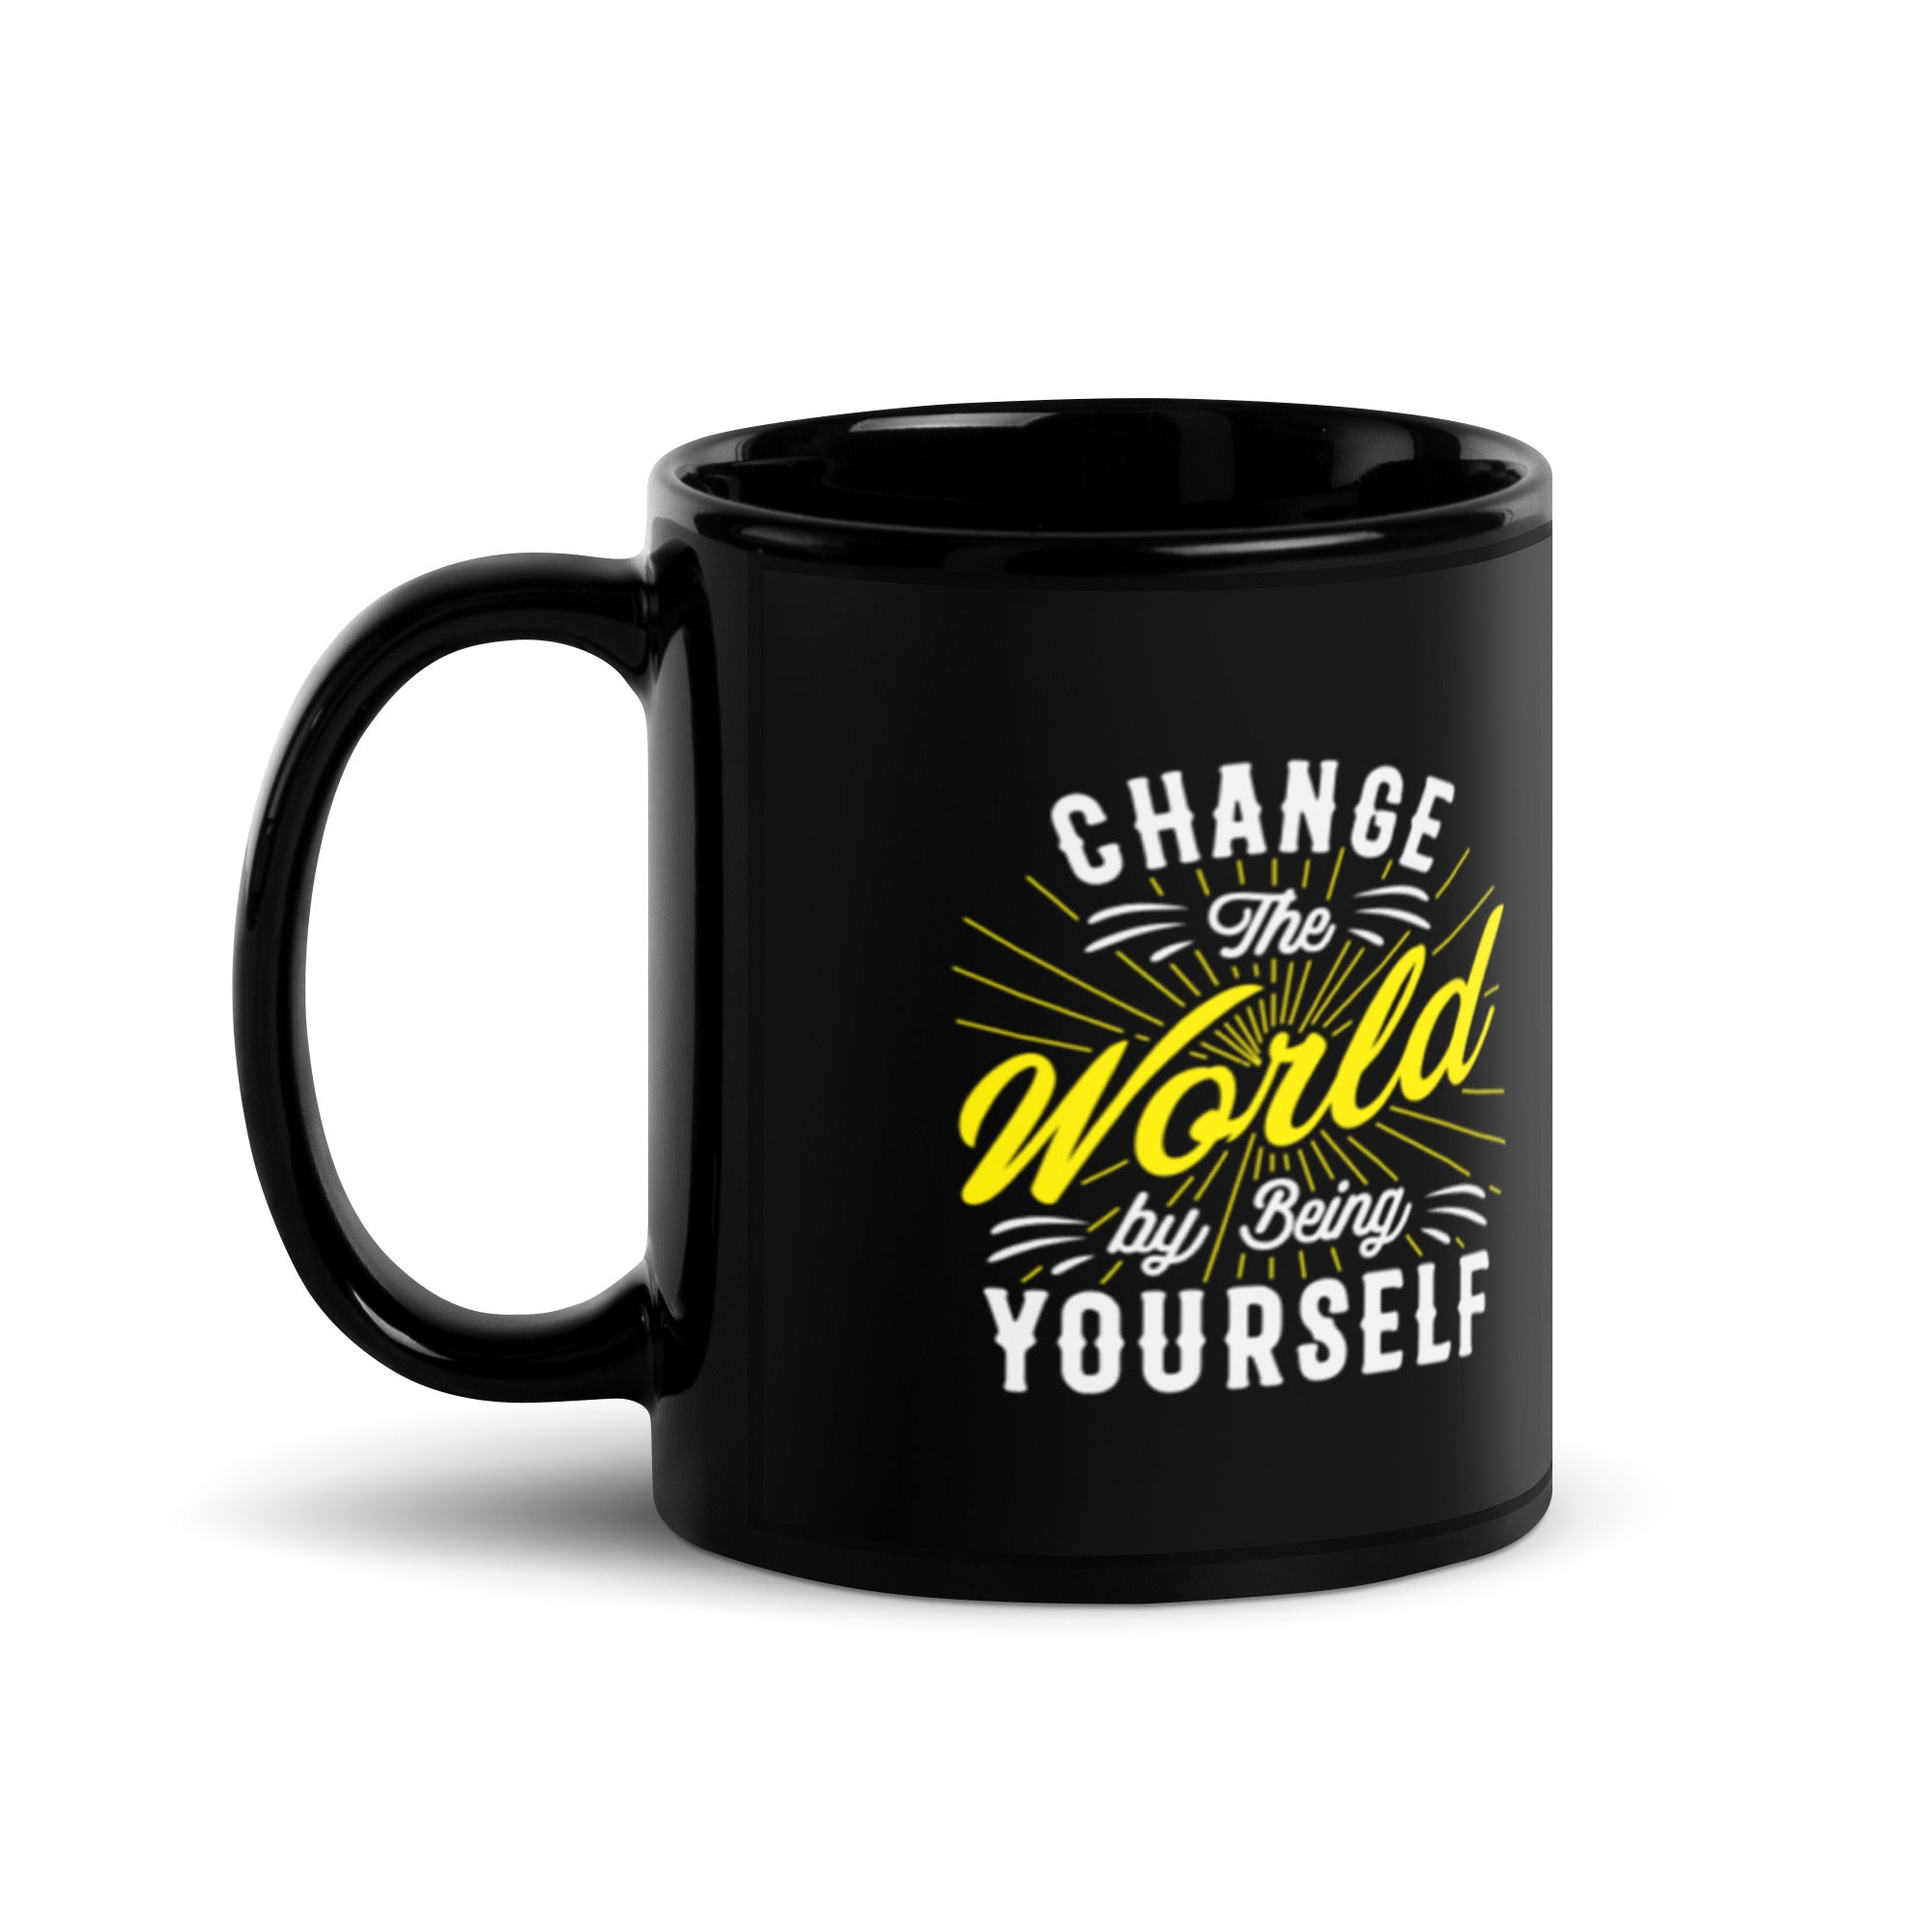 Change The World By Being Yourself - Black Glossy Mug